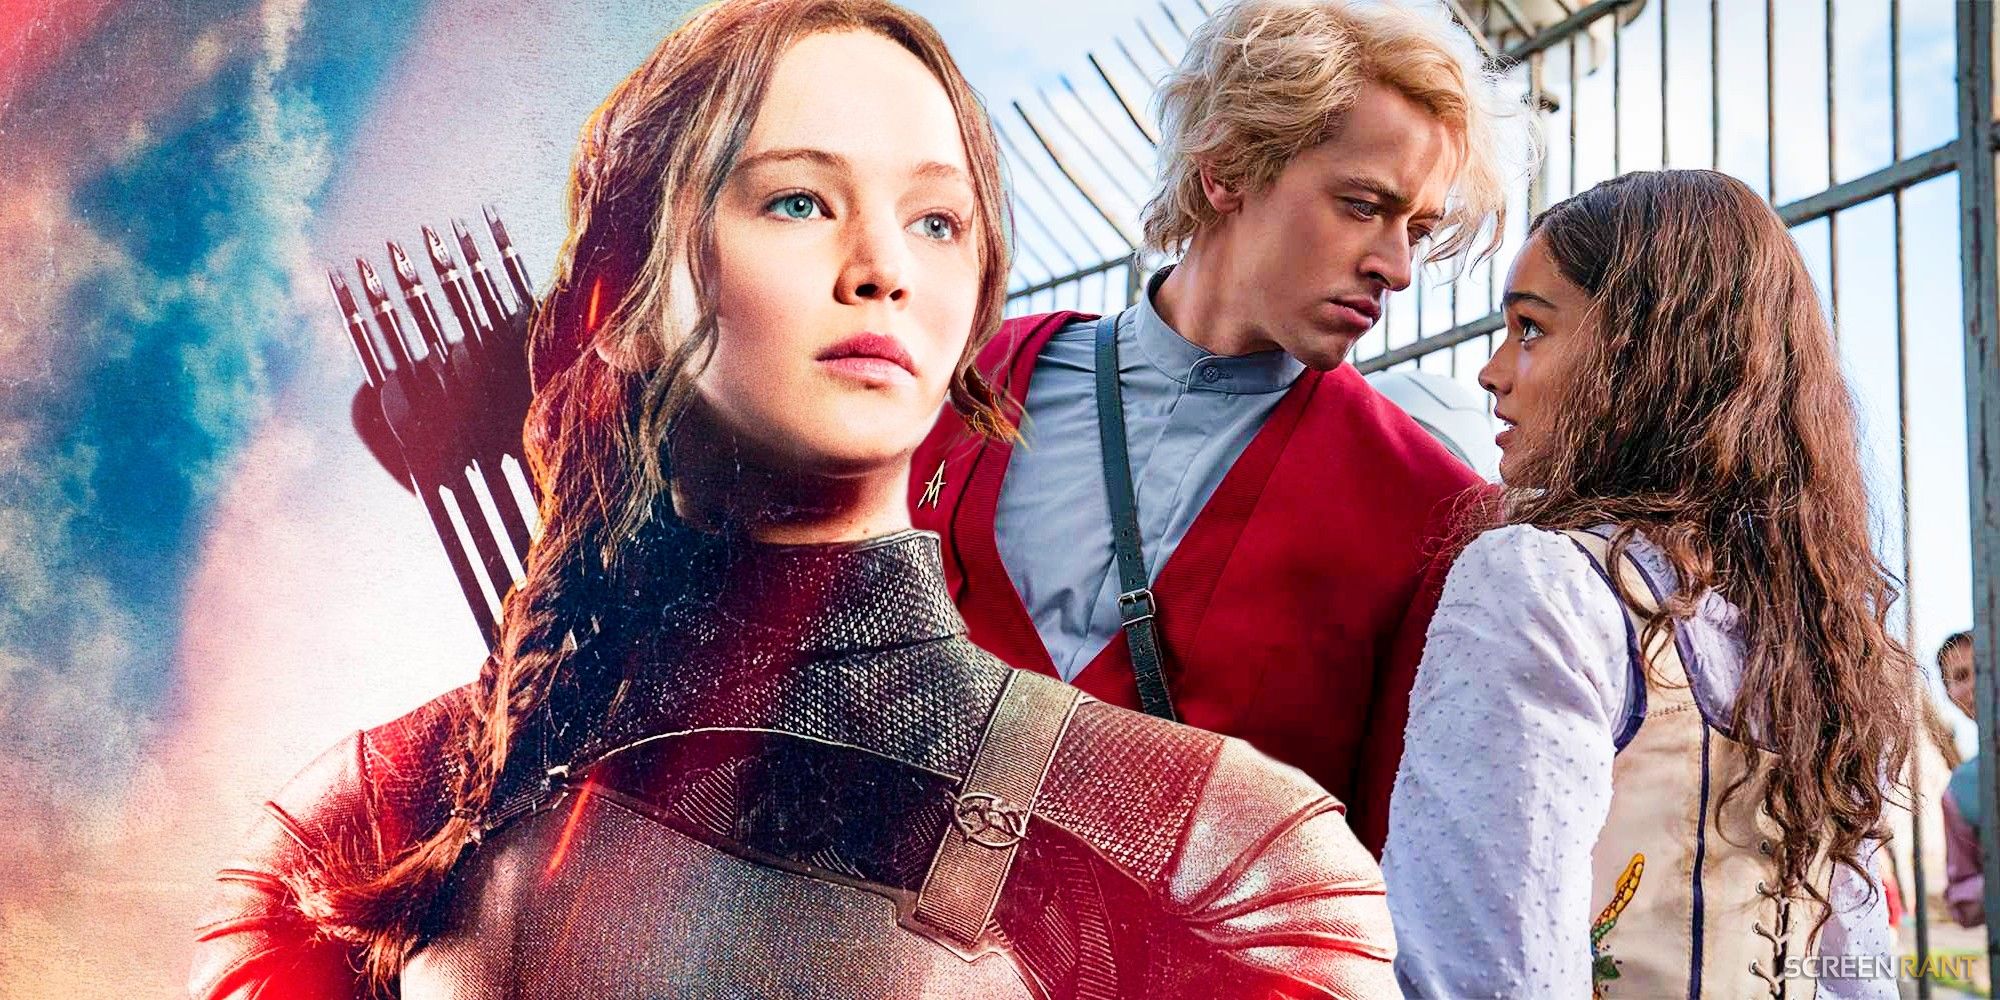 Best theaters to watch 'The Hunger Games: Mockingjay Part 2'